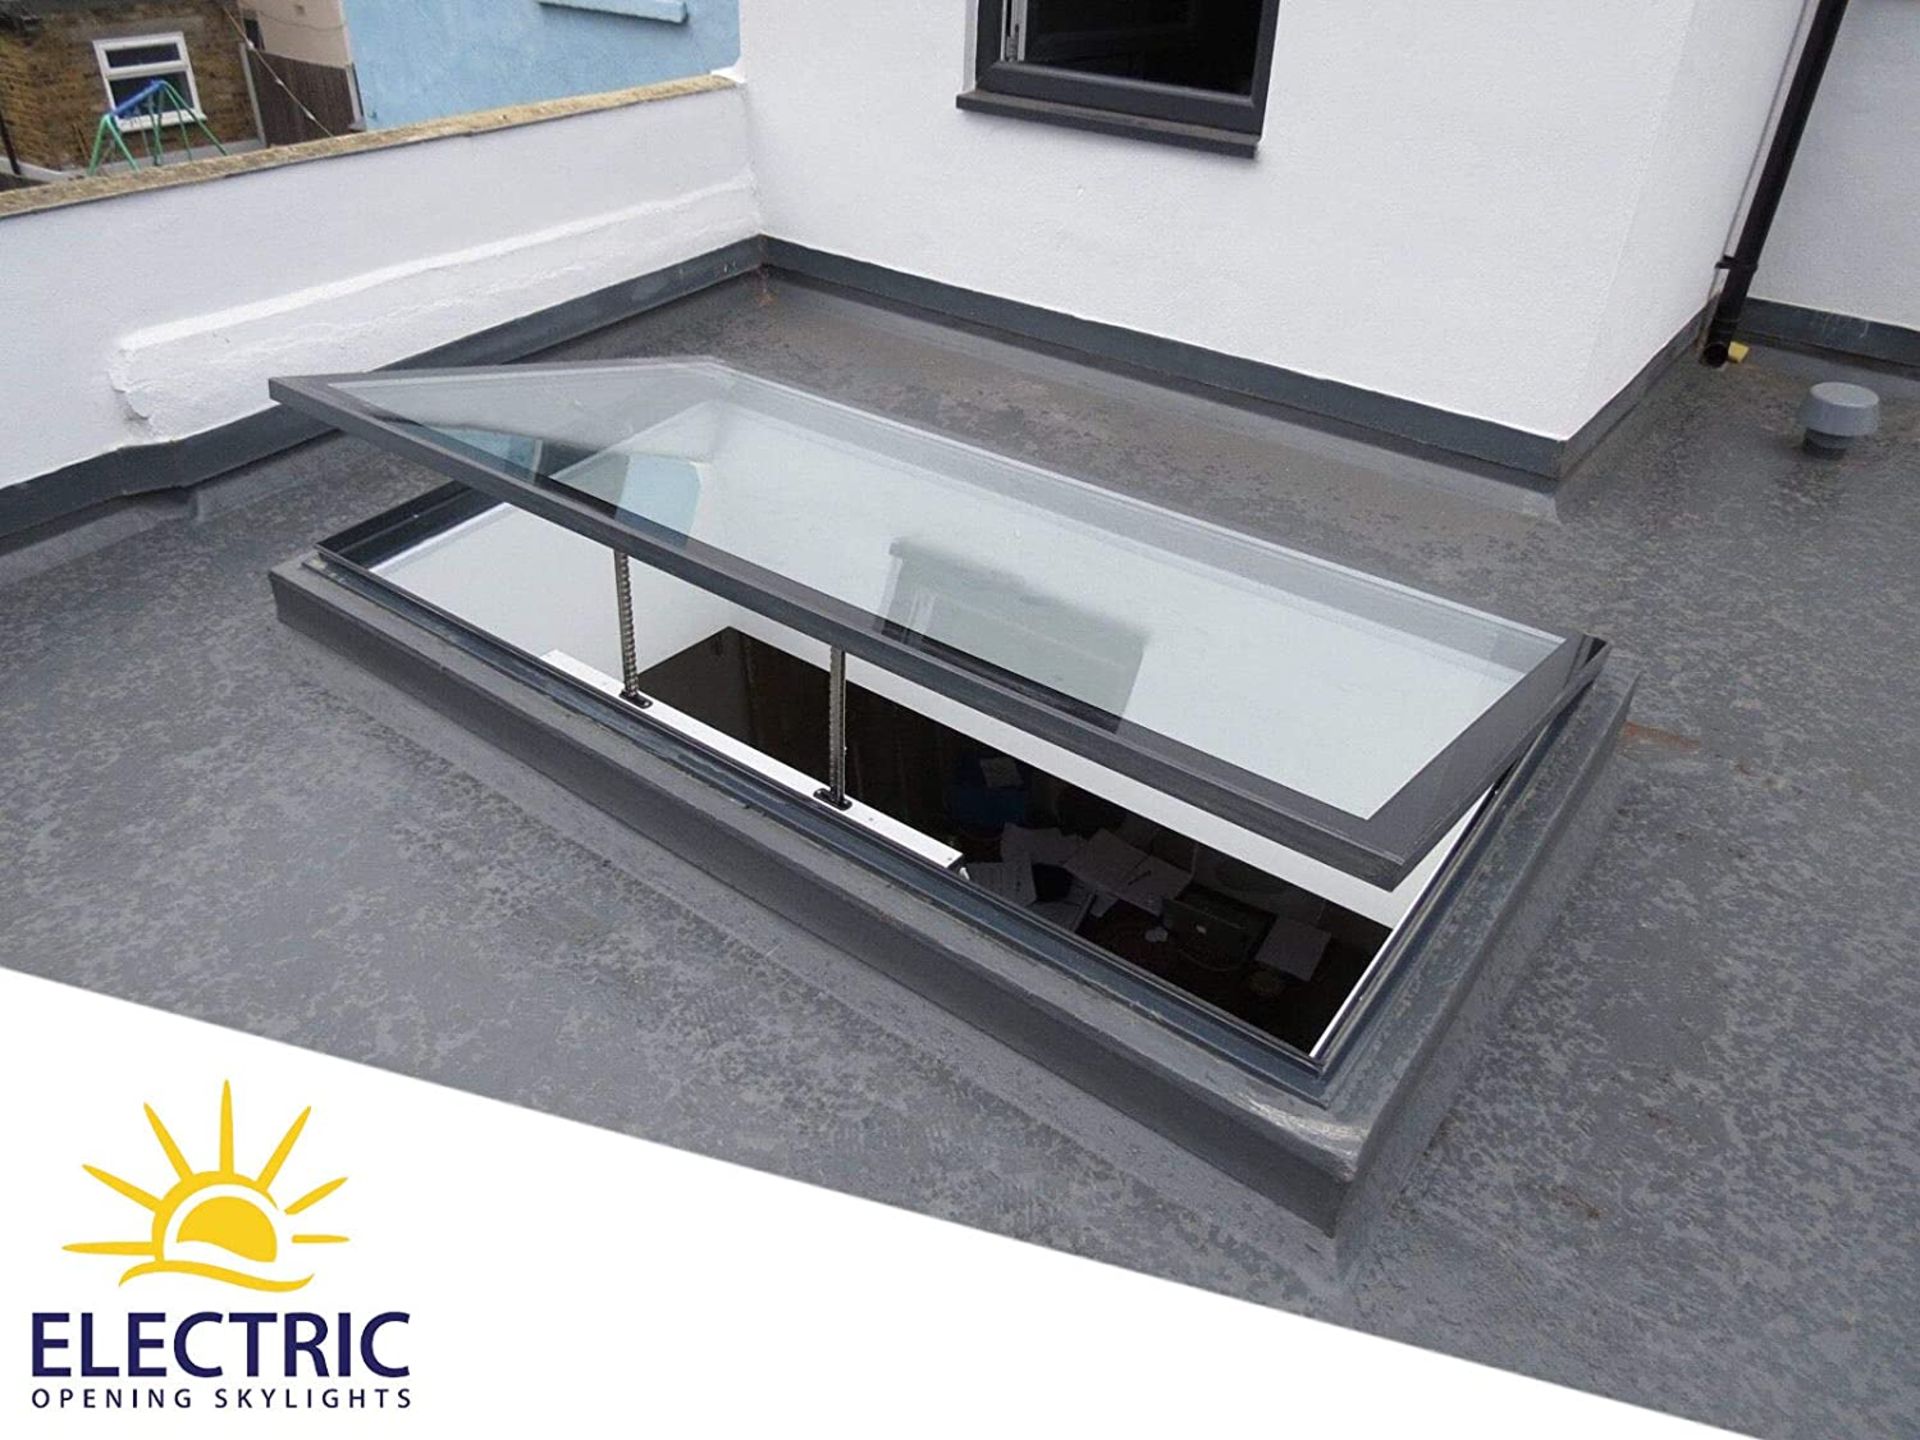 Panoroof (EOS) Electric Opening Skylight 1200x1200mm - Aluminiun Frame Double Glazed Laminated